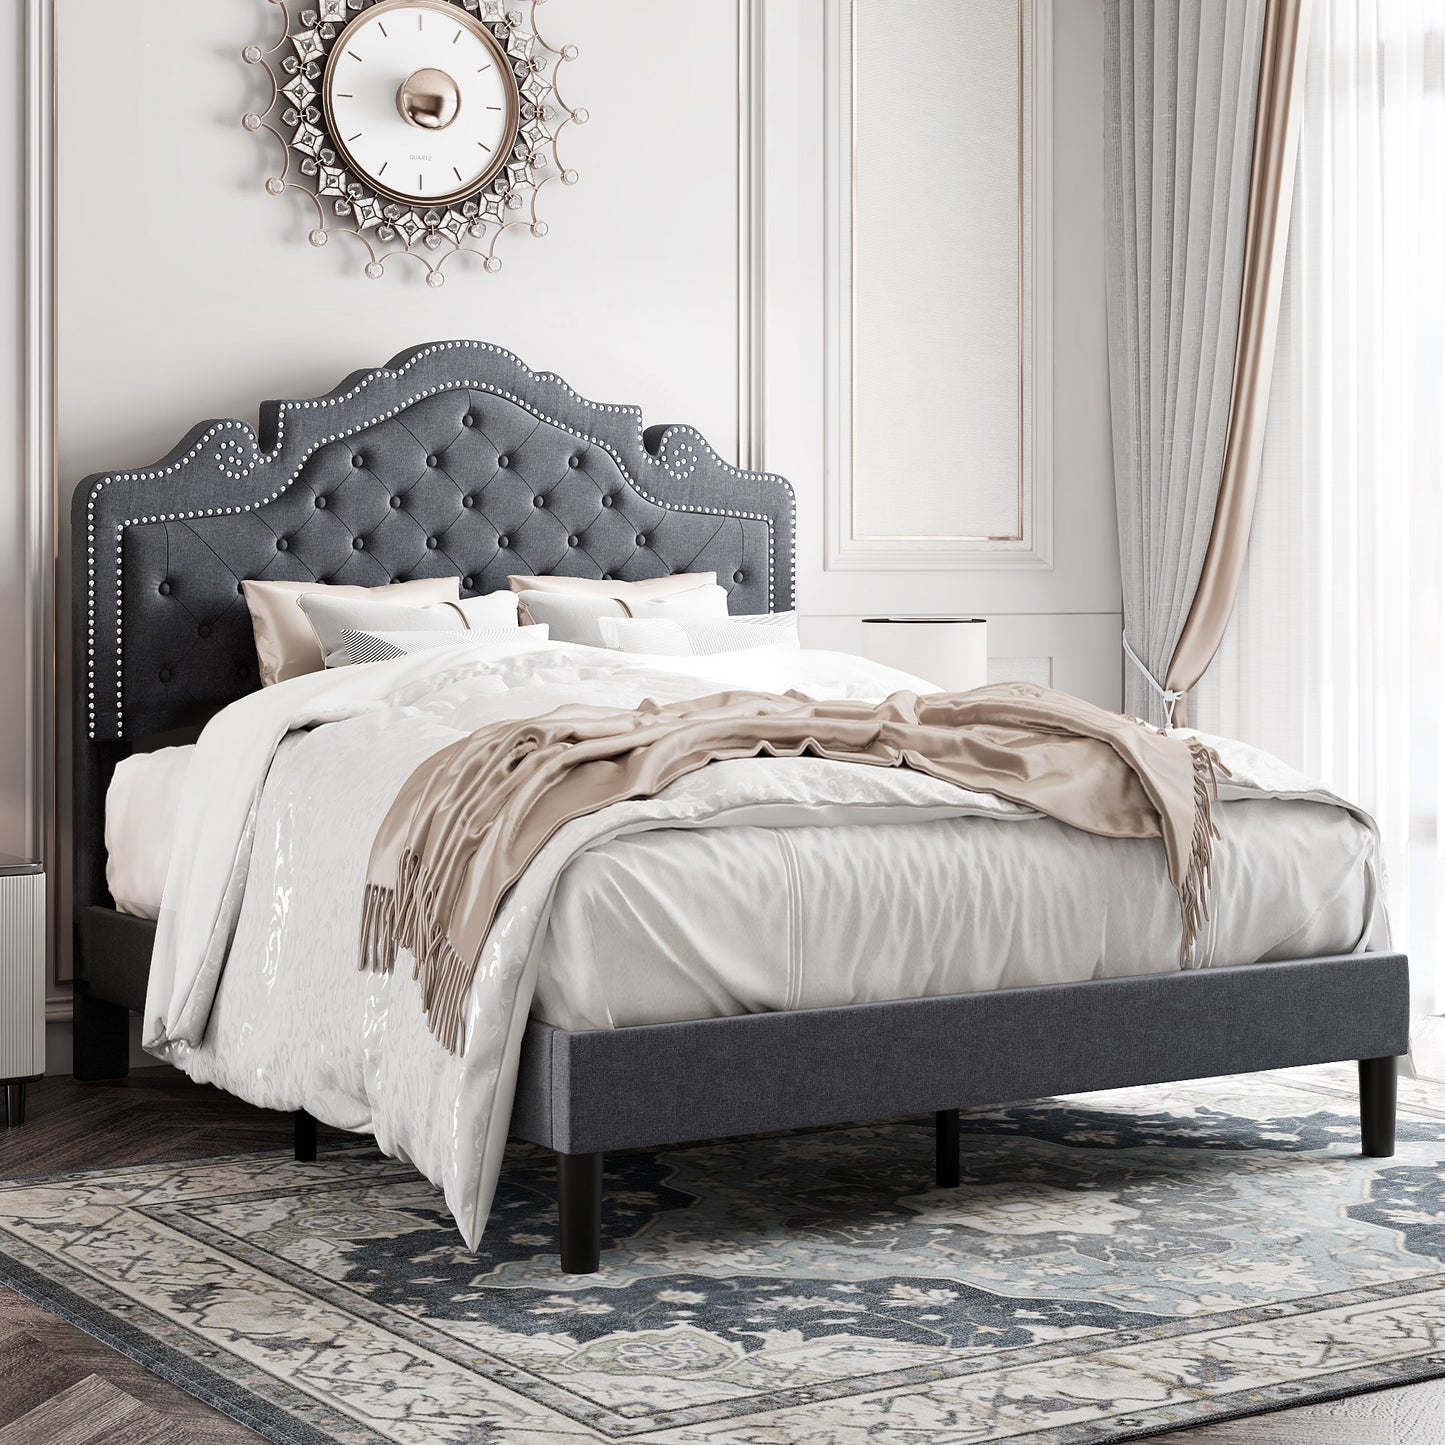 Allewie Platform Bed Frame with Tiara Upholstered Diamond Button Tufted Headboard